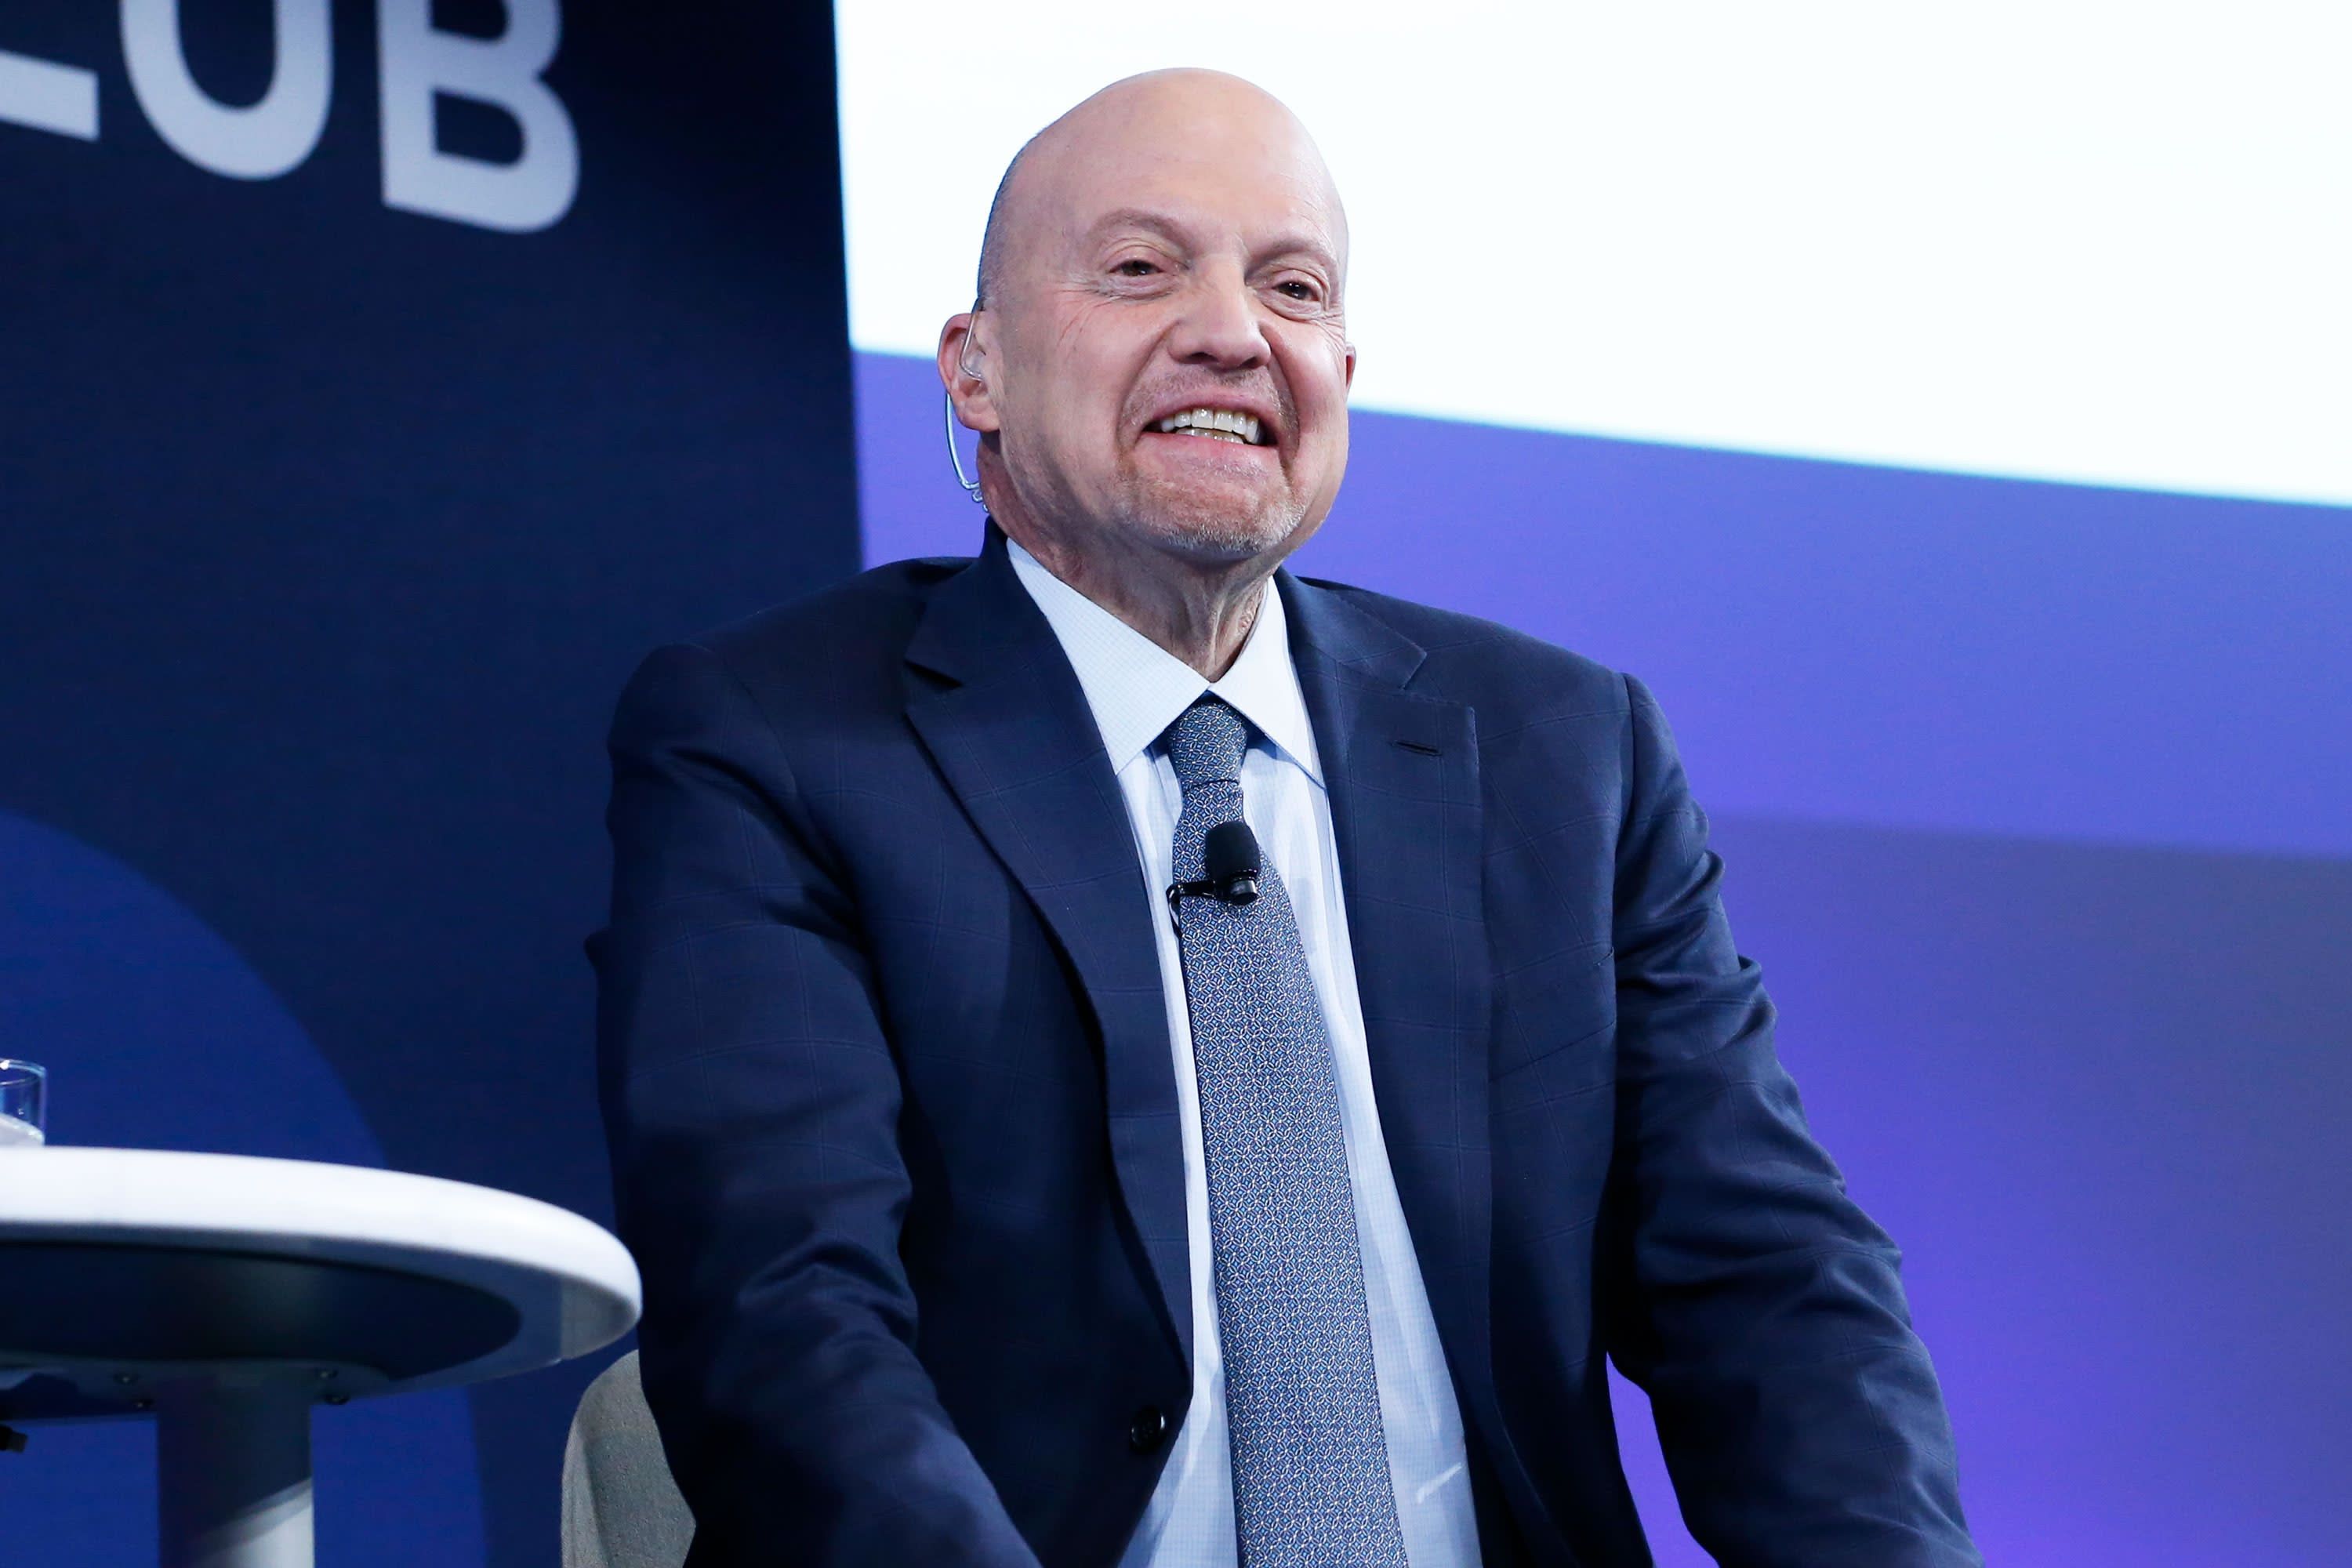 Club meeting recap: Jim Cramer says 'buy Ford, don't sell it,' while also touting Caterpillar